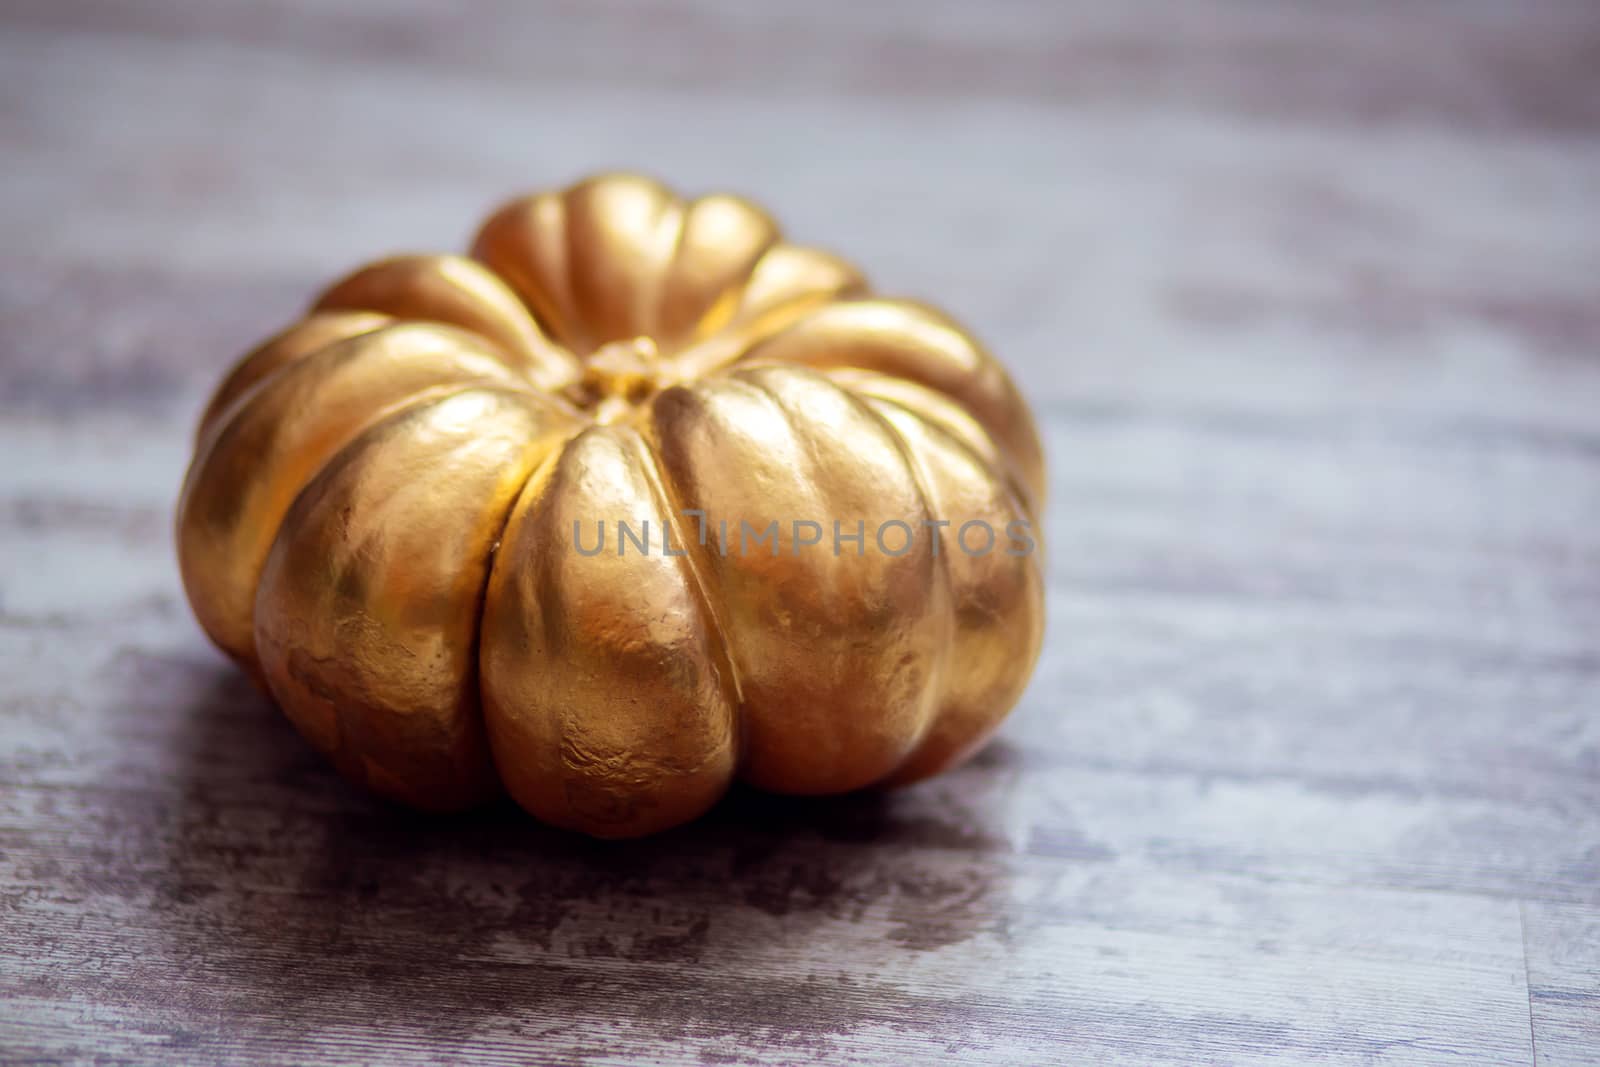 Top view of a large pumpkin painted gold. Postcard for Halloween.